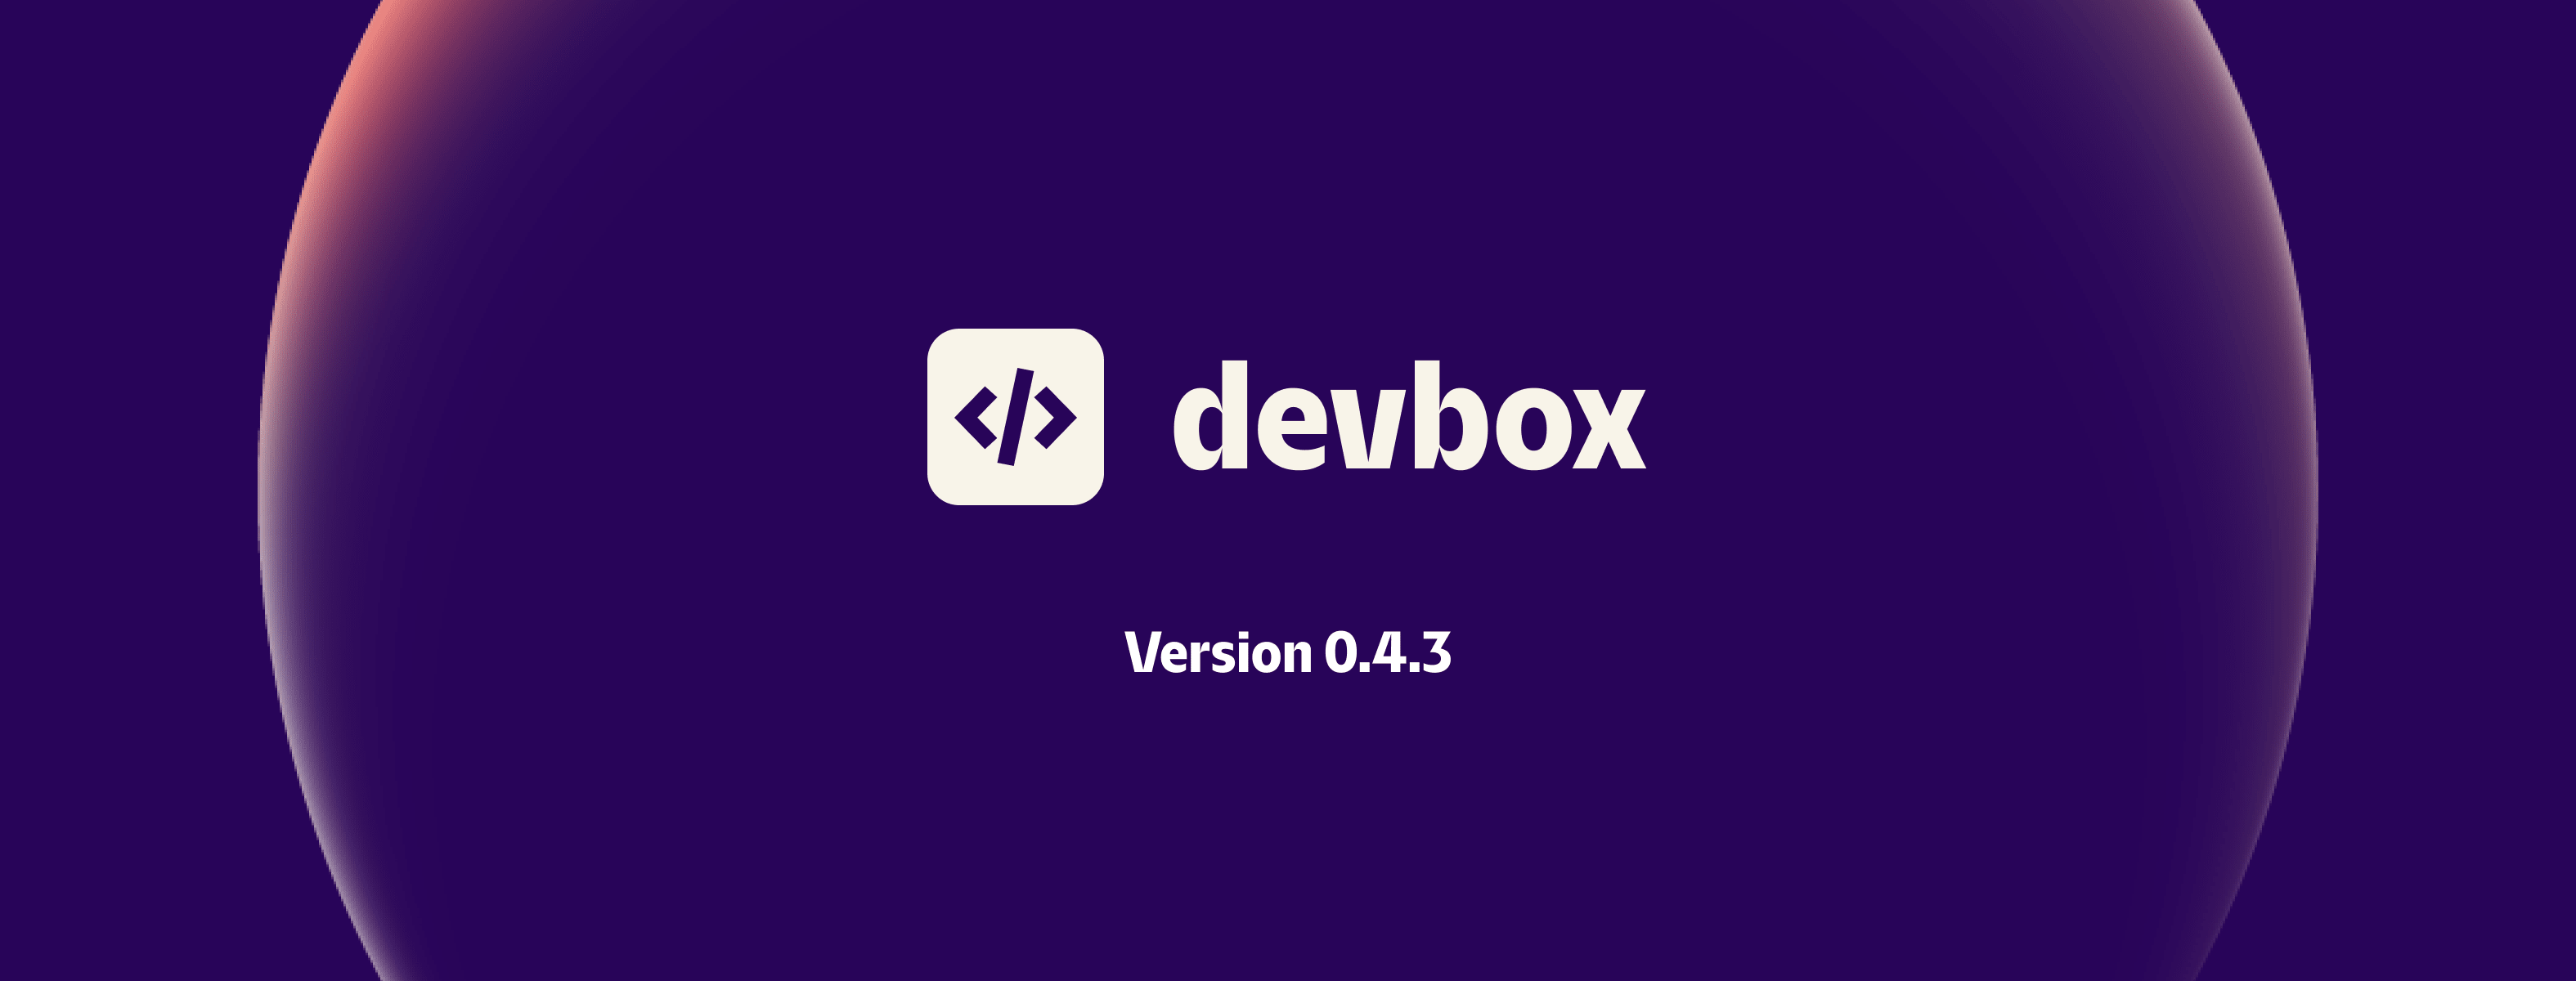 Devbox 0.4.3: Powered by Flakes